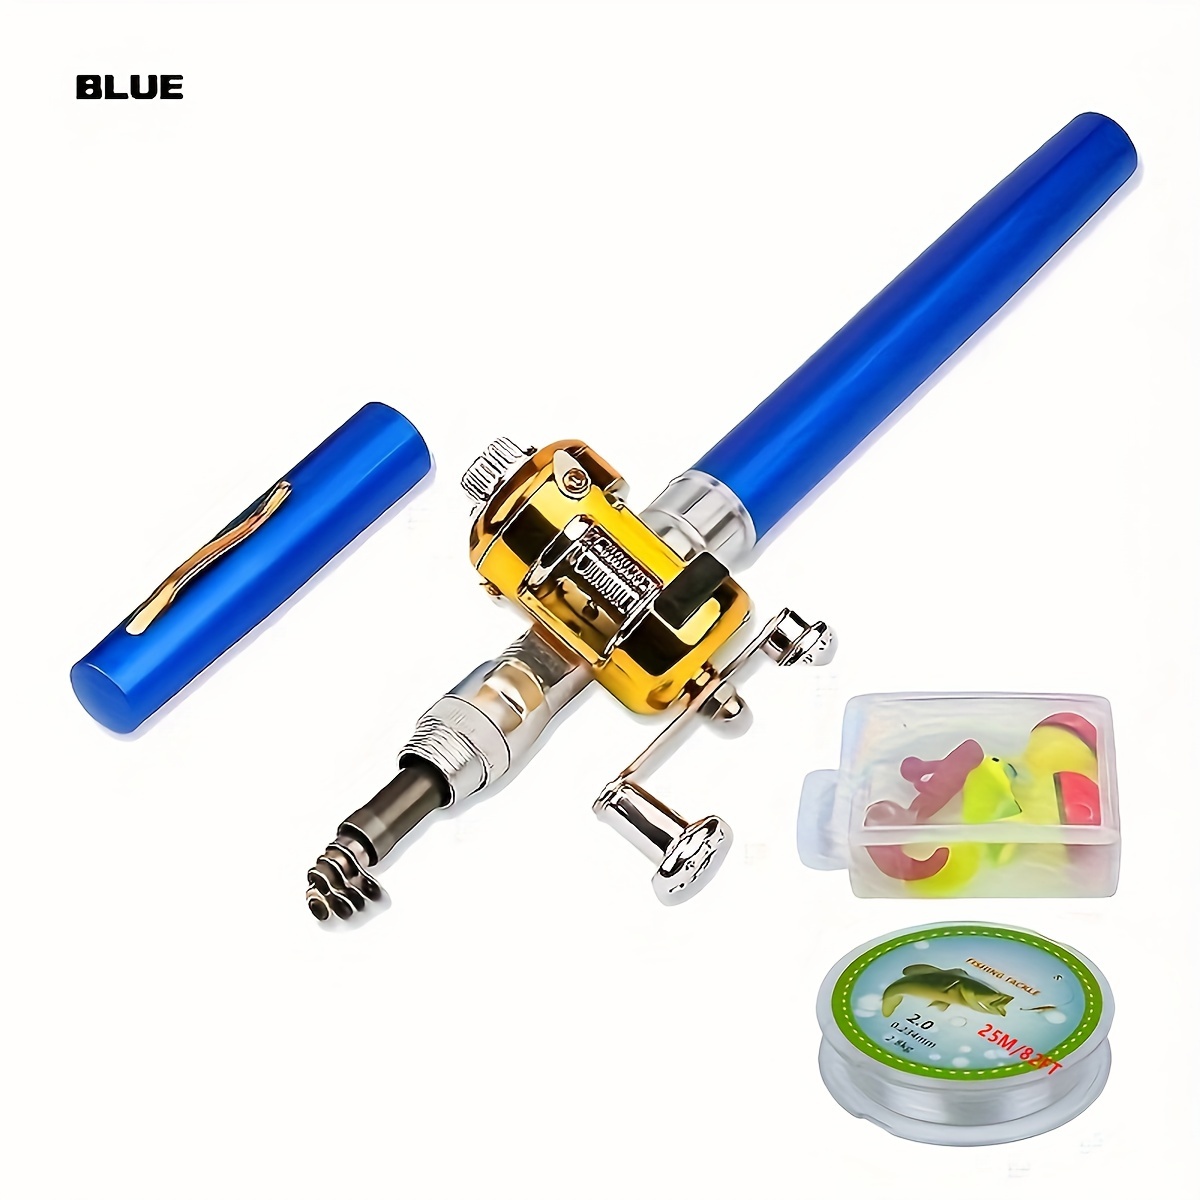 pen style fishing rod, pen style fishing rod Suppliers and